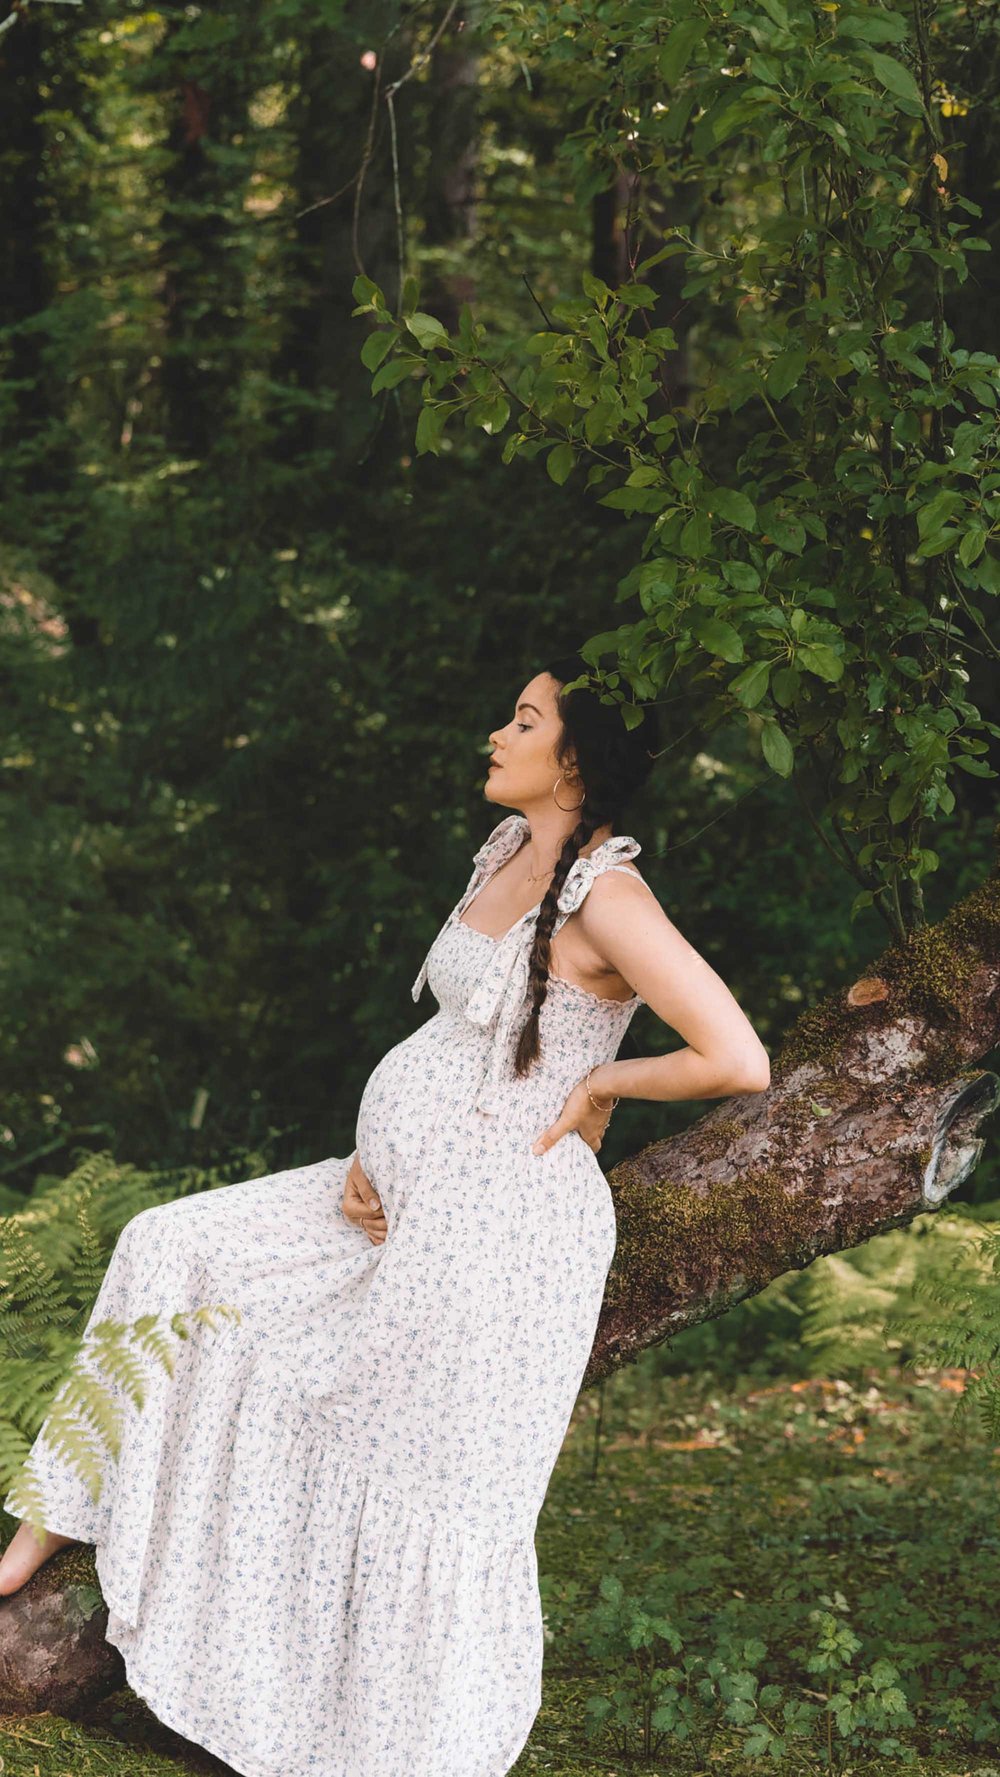 Casual Floral Maternity Dress Outfit. @sarahchristine wearing Nothing Fits Women’s Classic Nursing Momoka Dress with smocked chest in Seattle, Washington - 12.jpg